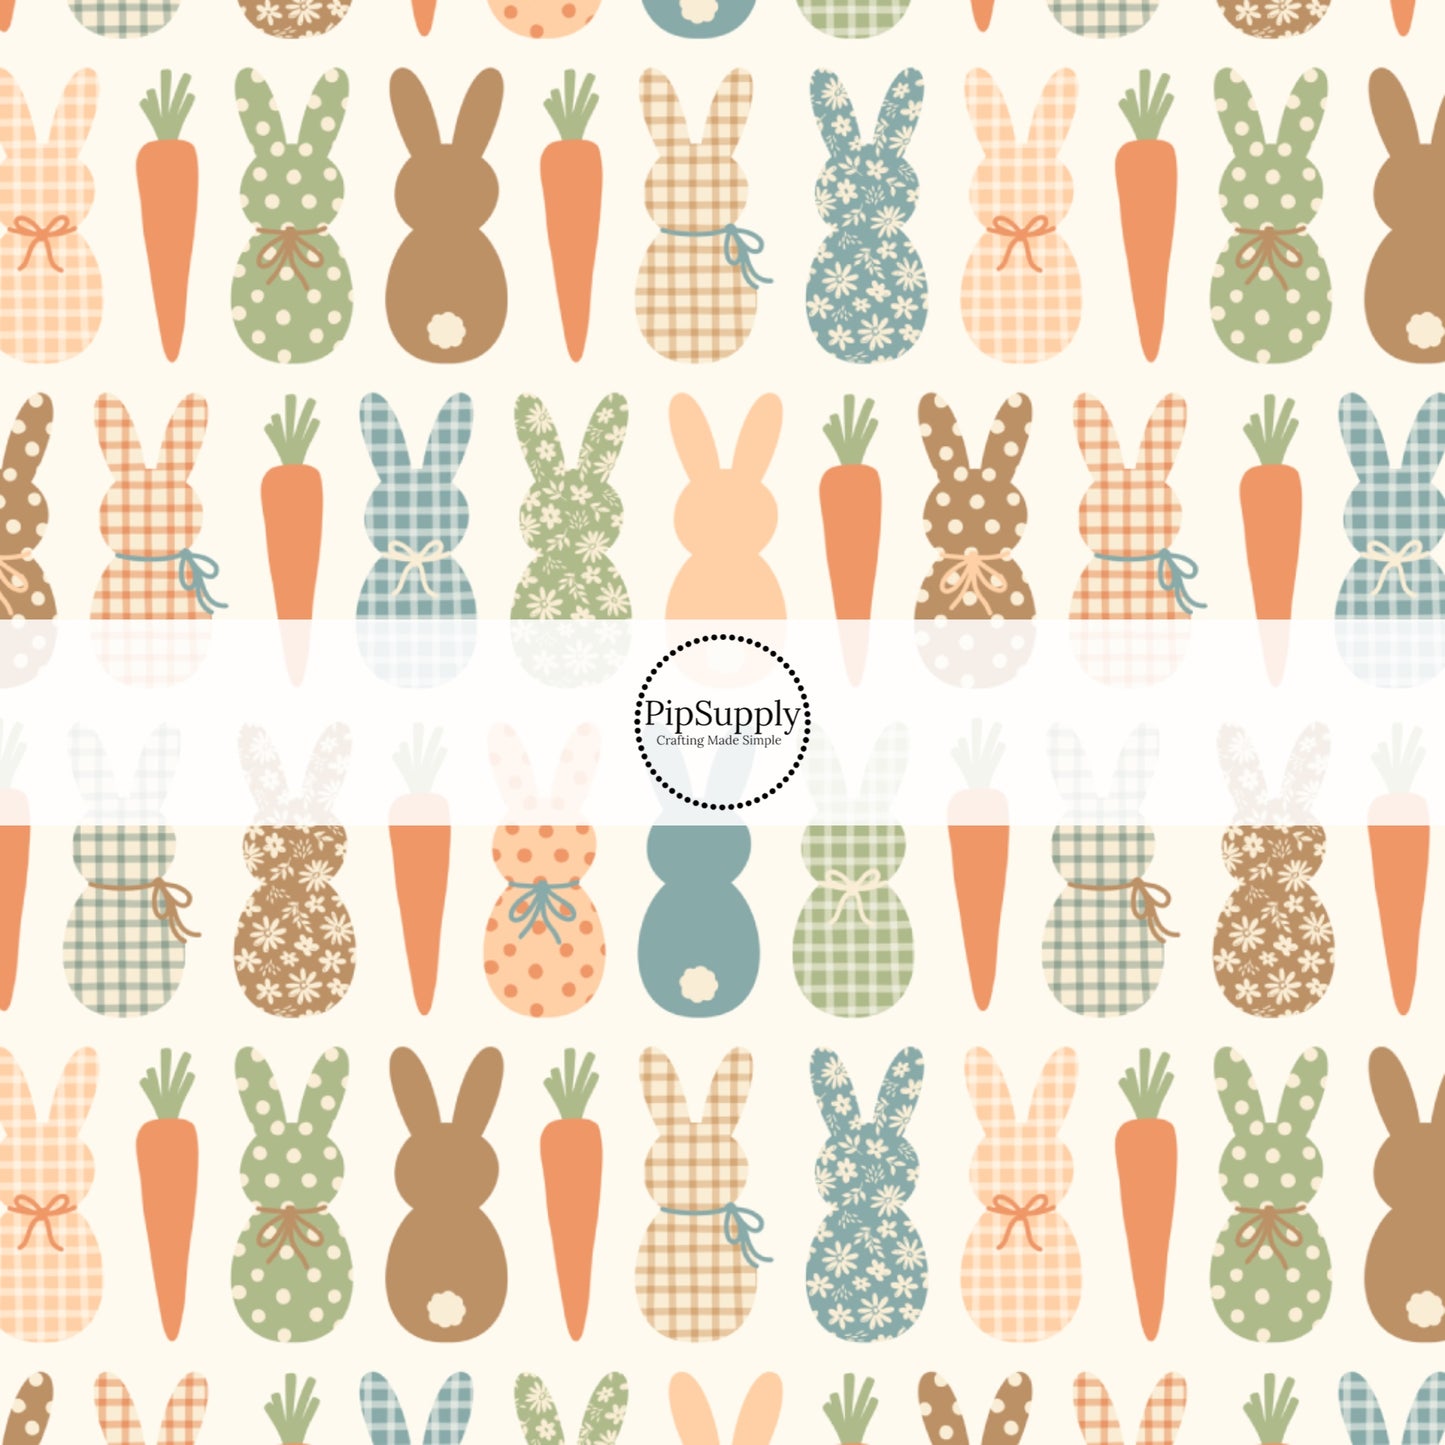 Neutral Toned Patterned Fluffy Bunnies on Cream Fabric by the Yard.